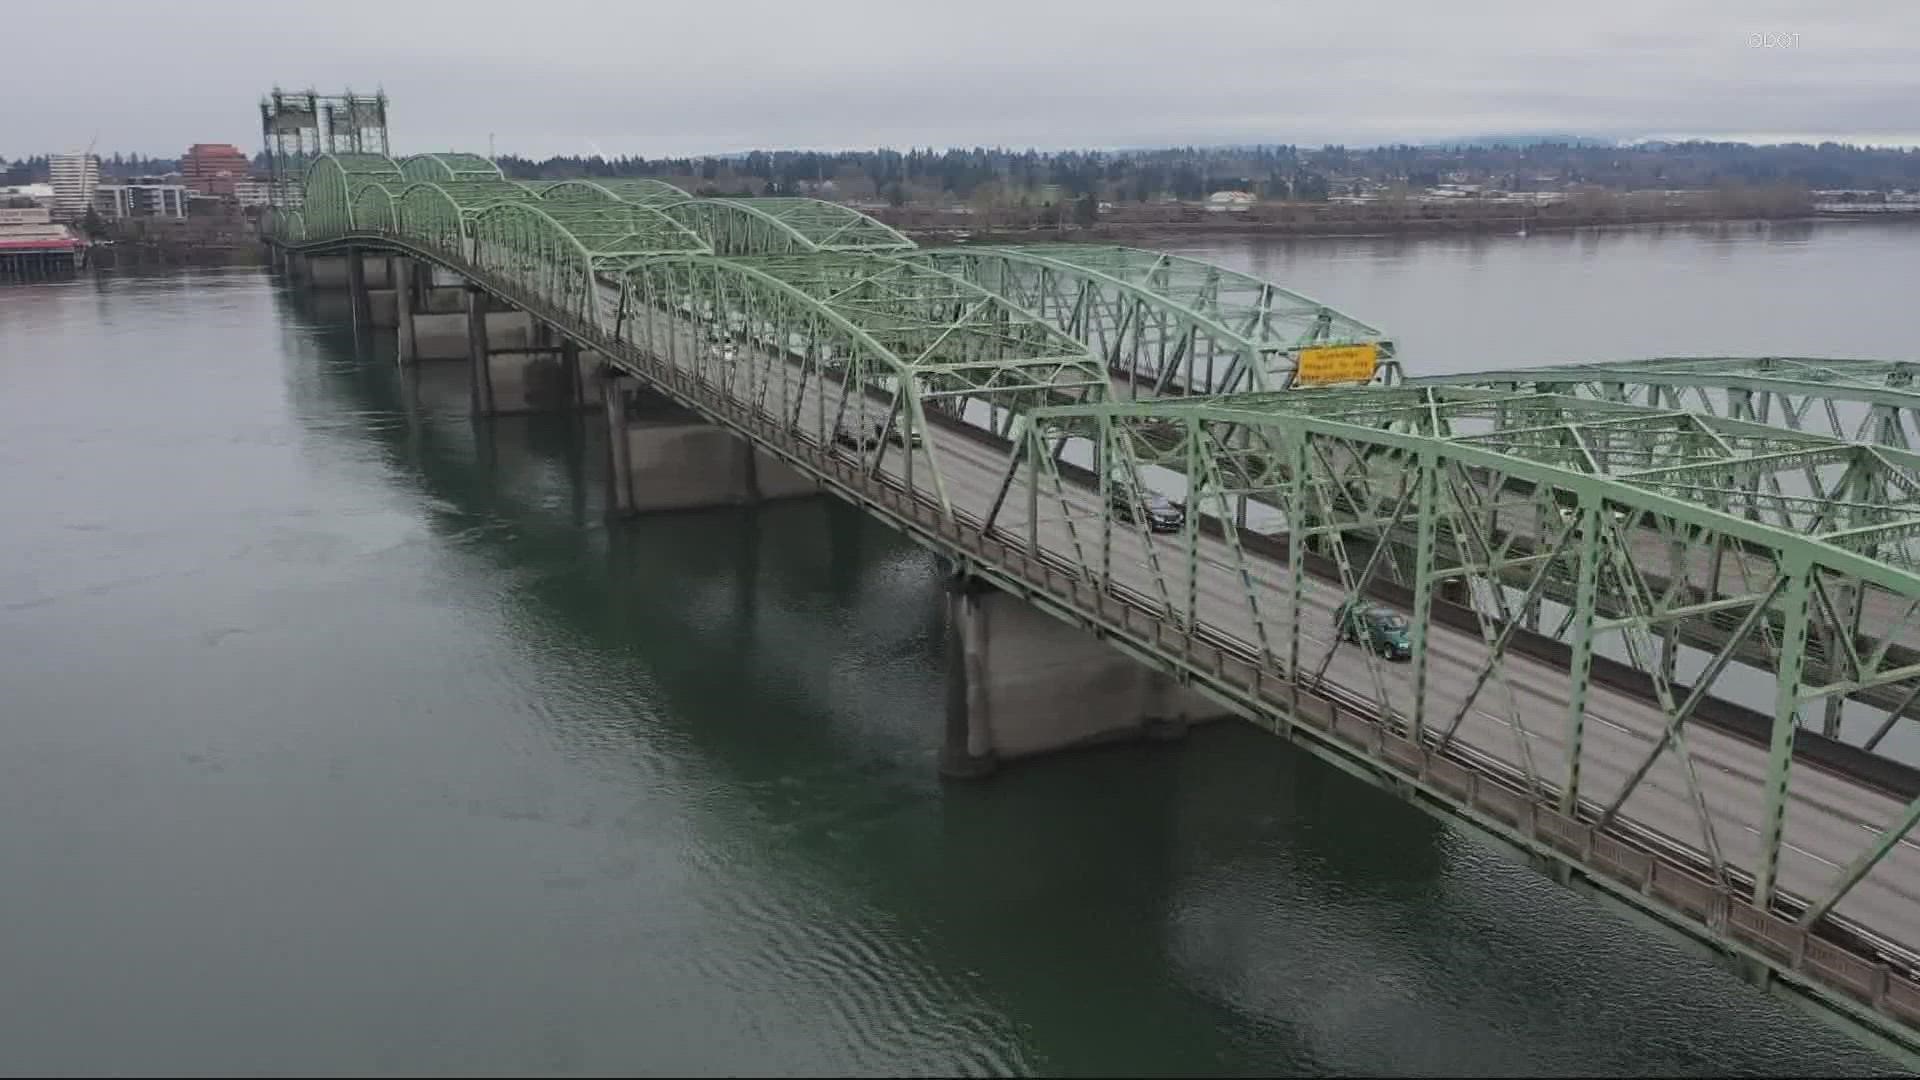 The Interstate Bridge connecting Oregon and Washington desperately needs to be replaced, and it's been a work in progress for years.